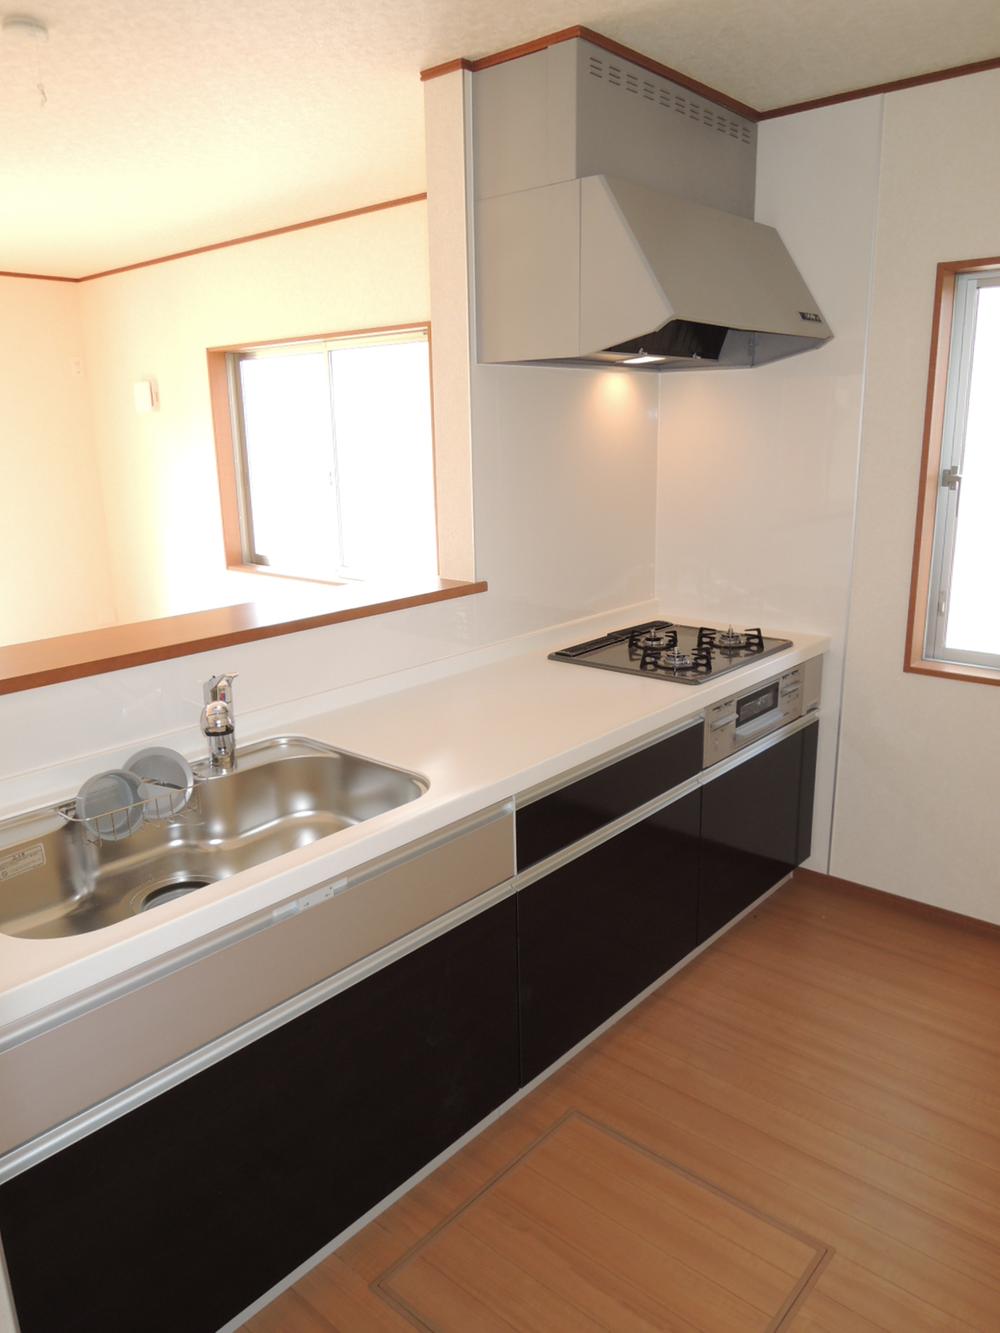 Same specifications photo (kitchen). Face-to-face kitchen (same specifications)